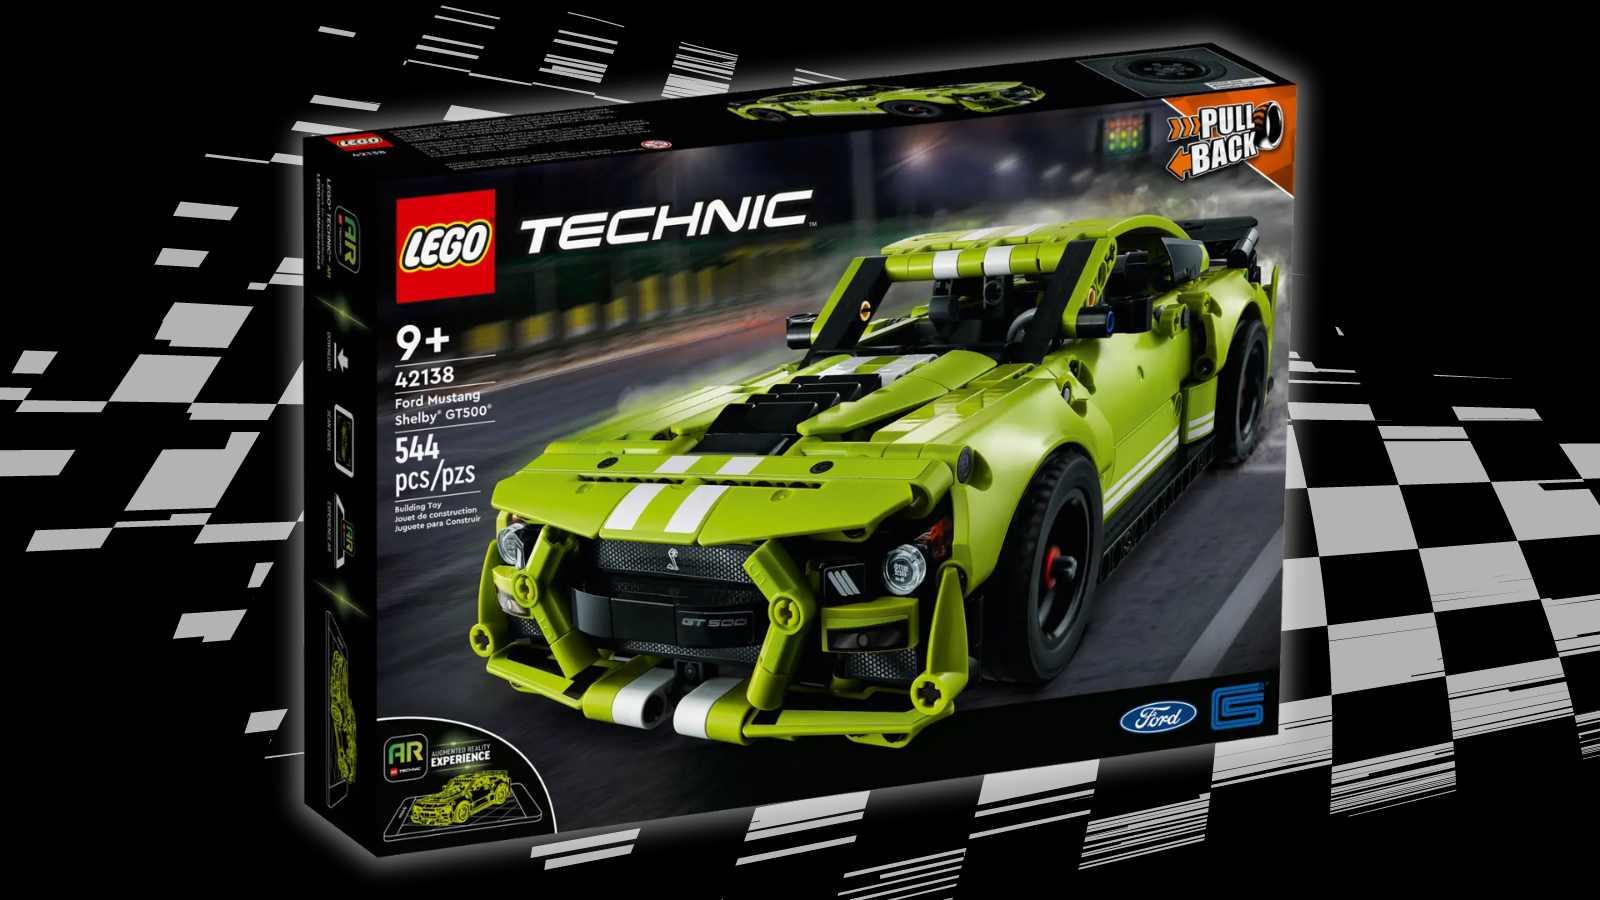 The LEGO Technic Ford Mustang Shelby GT500 set displayed on a black background with a racing-stripe graphic